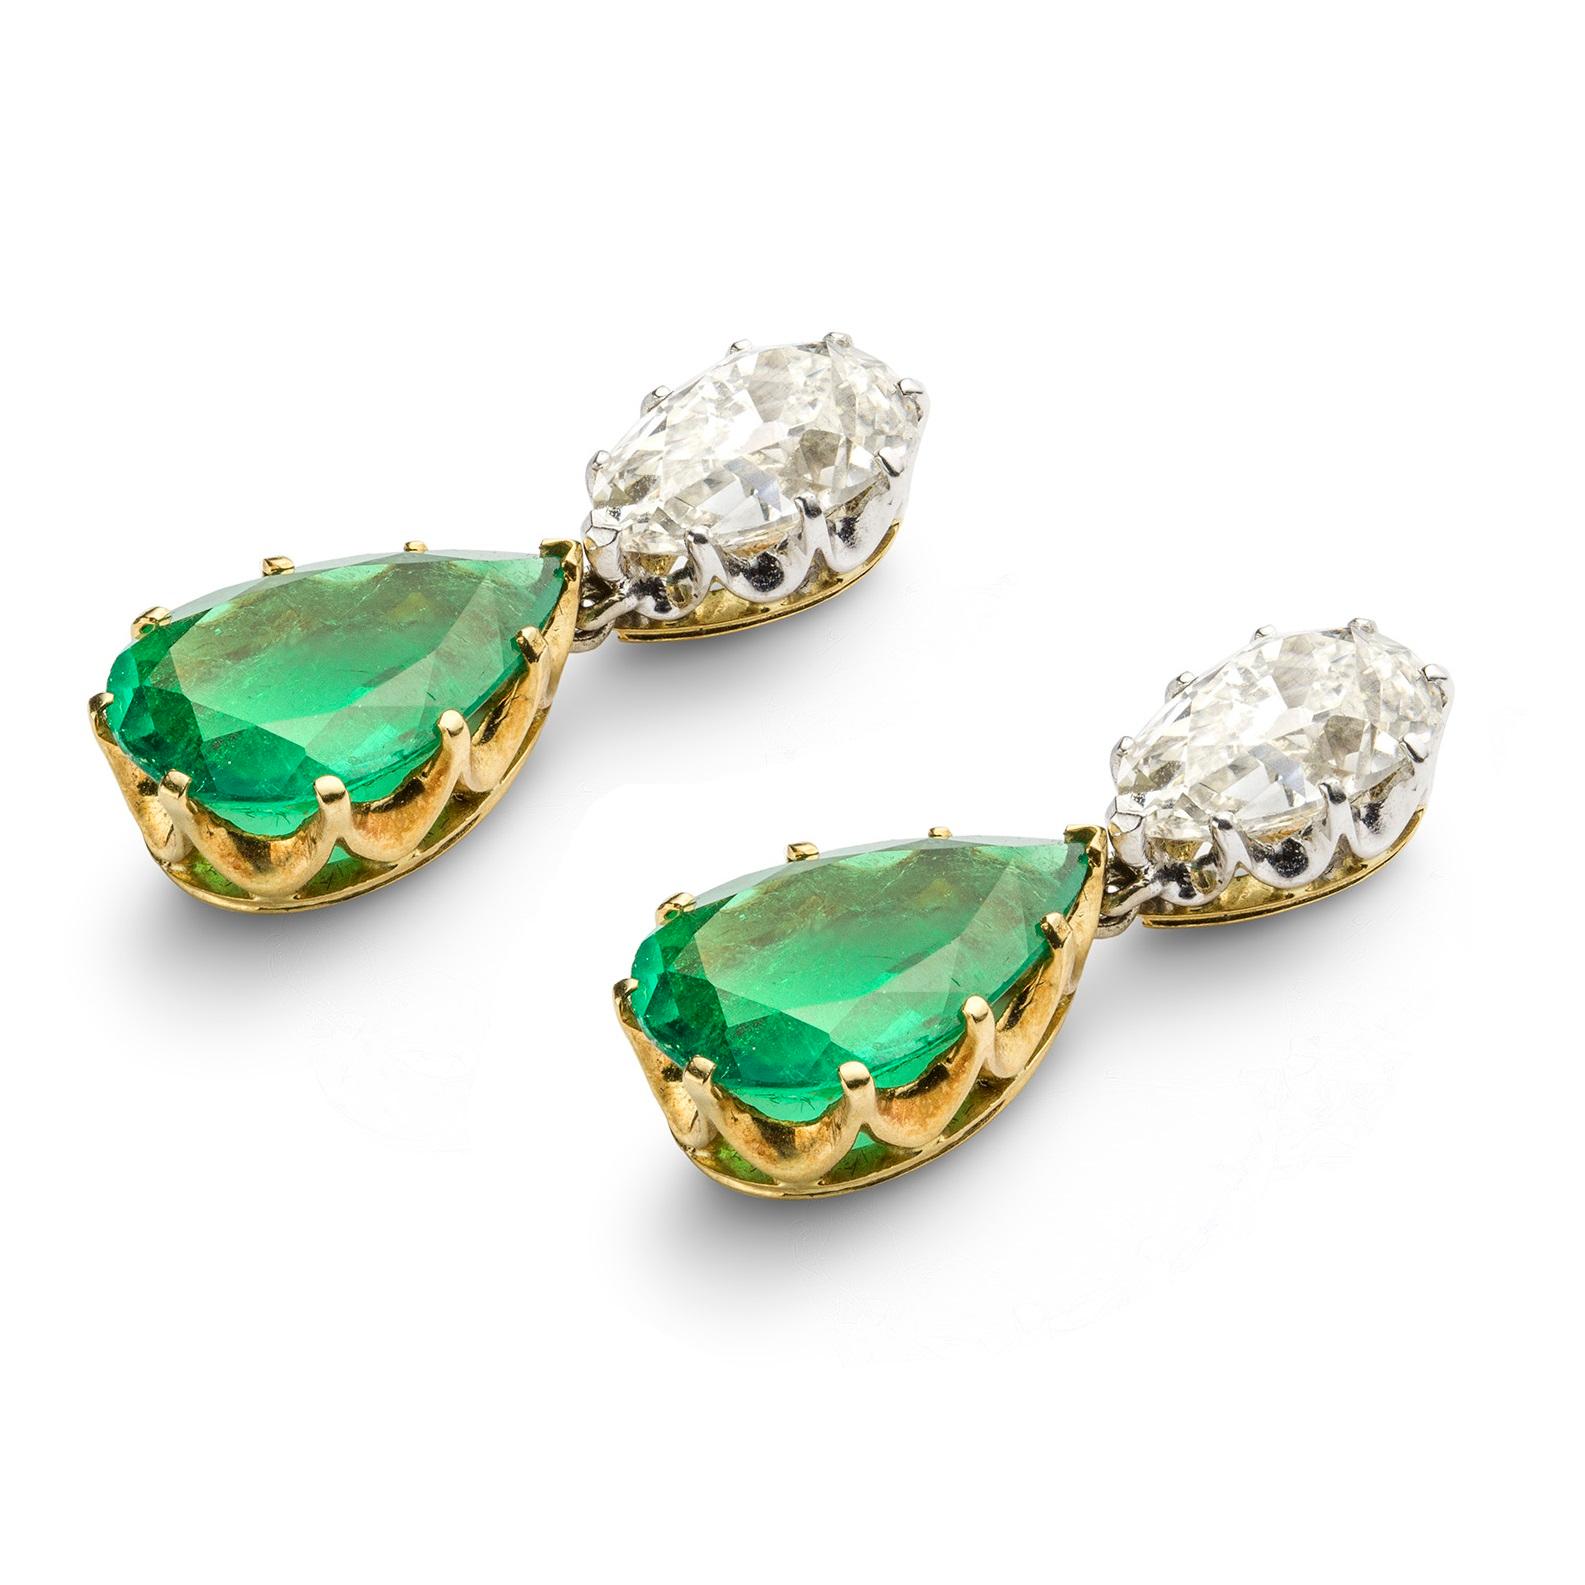 A pair of vintage diamond and emerald drop earrings, each set with a pear-shaped Colombian emerald weighing 7.26 carats for the pair, suspended from a pear-shaped diamond top weighing 1.97 carats H colour and SI2 clarity and 2.09 carats I colour and